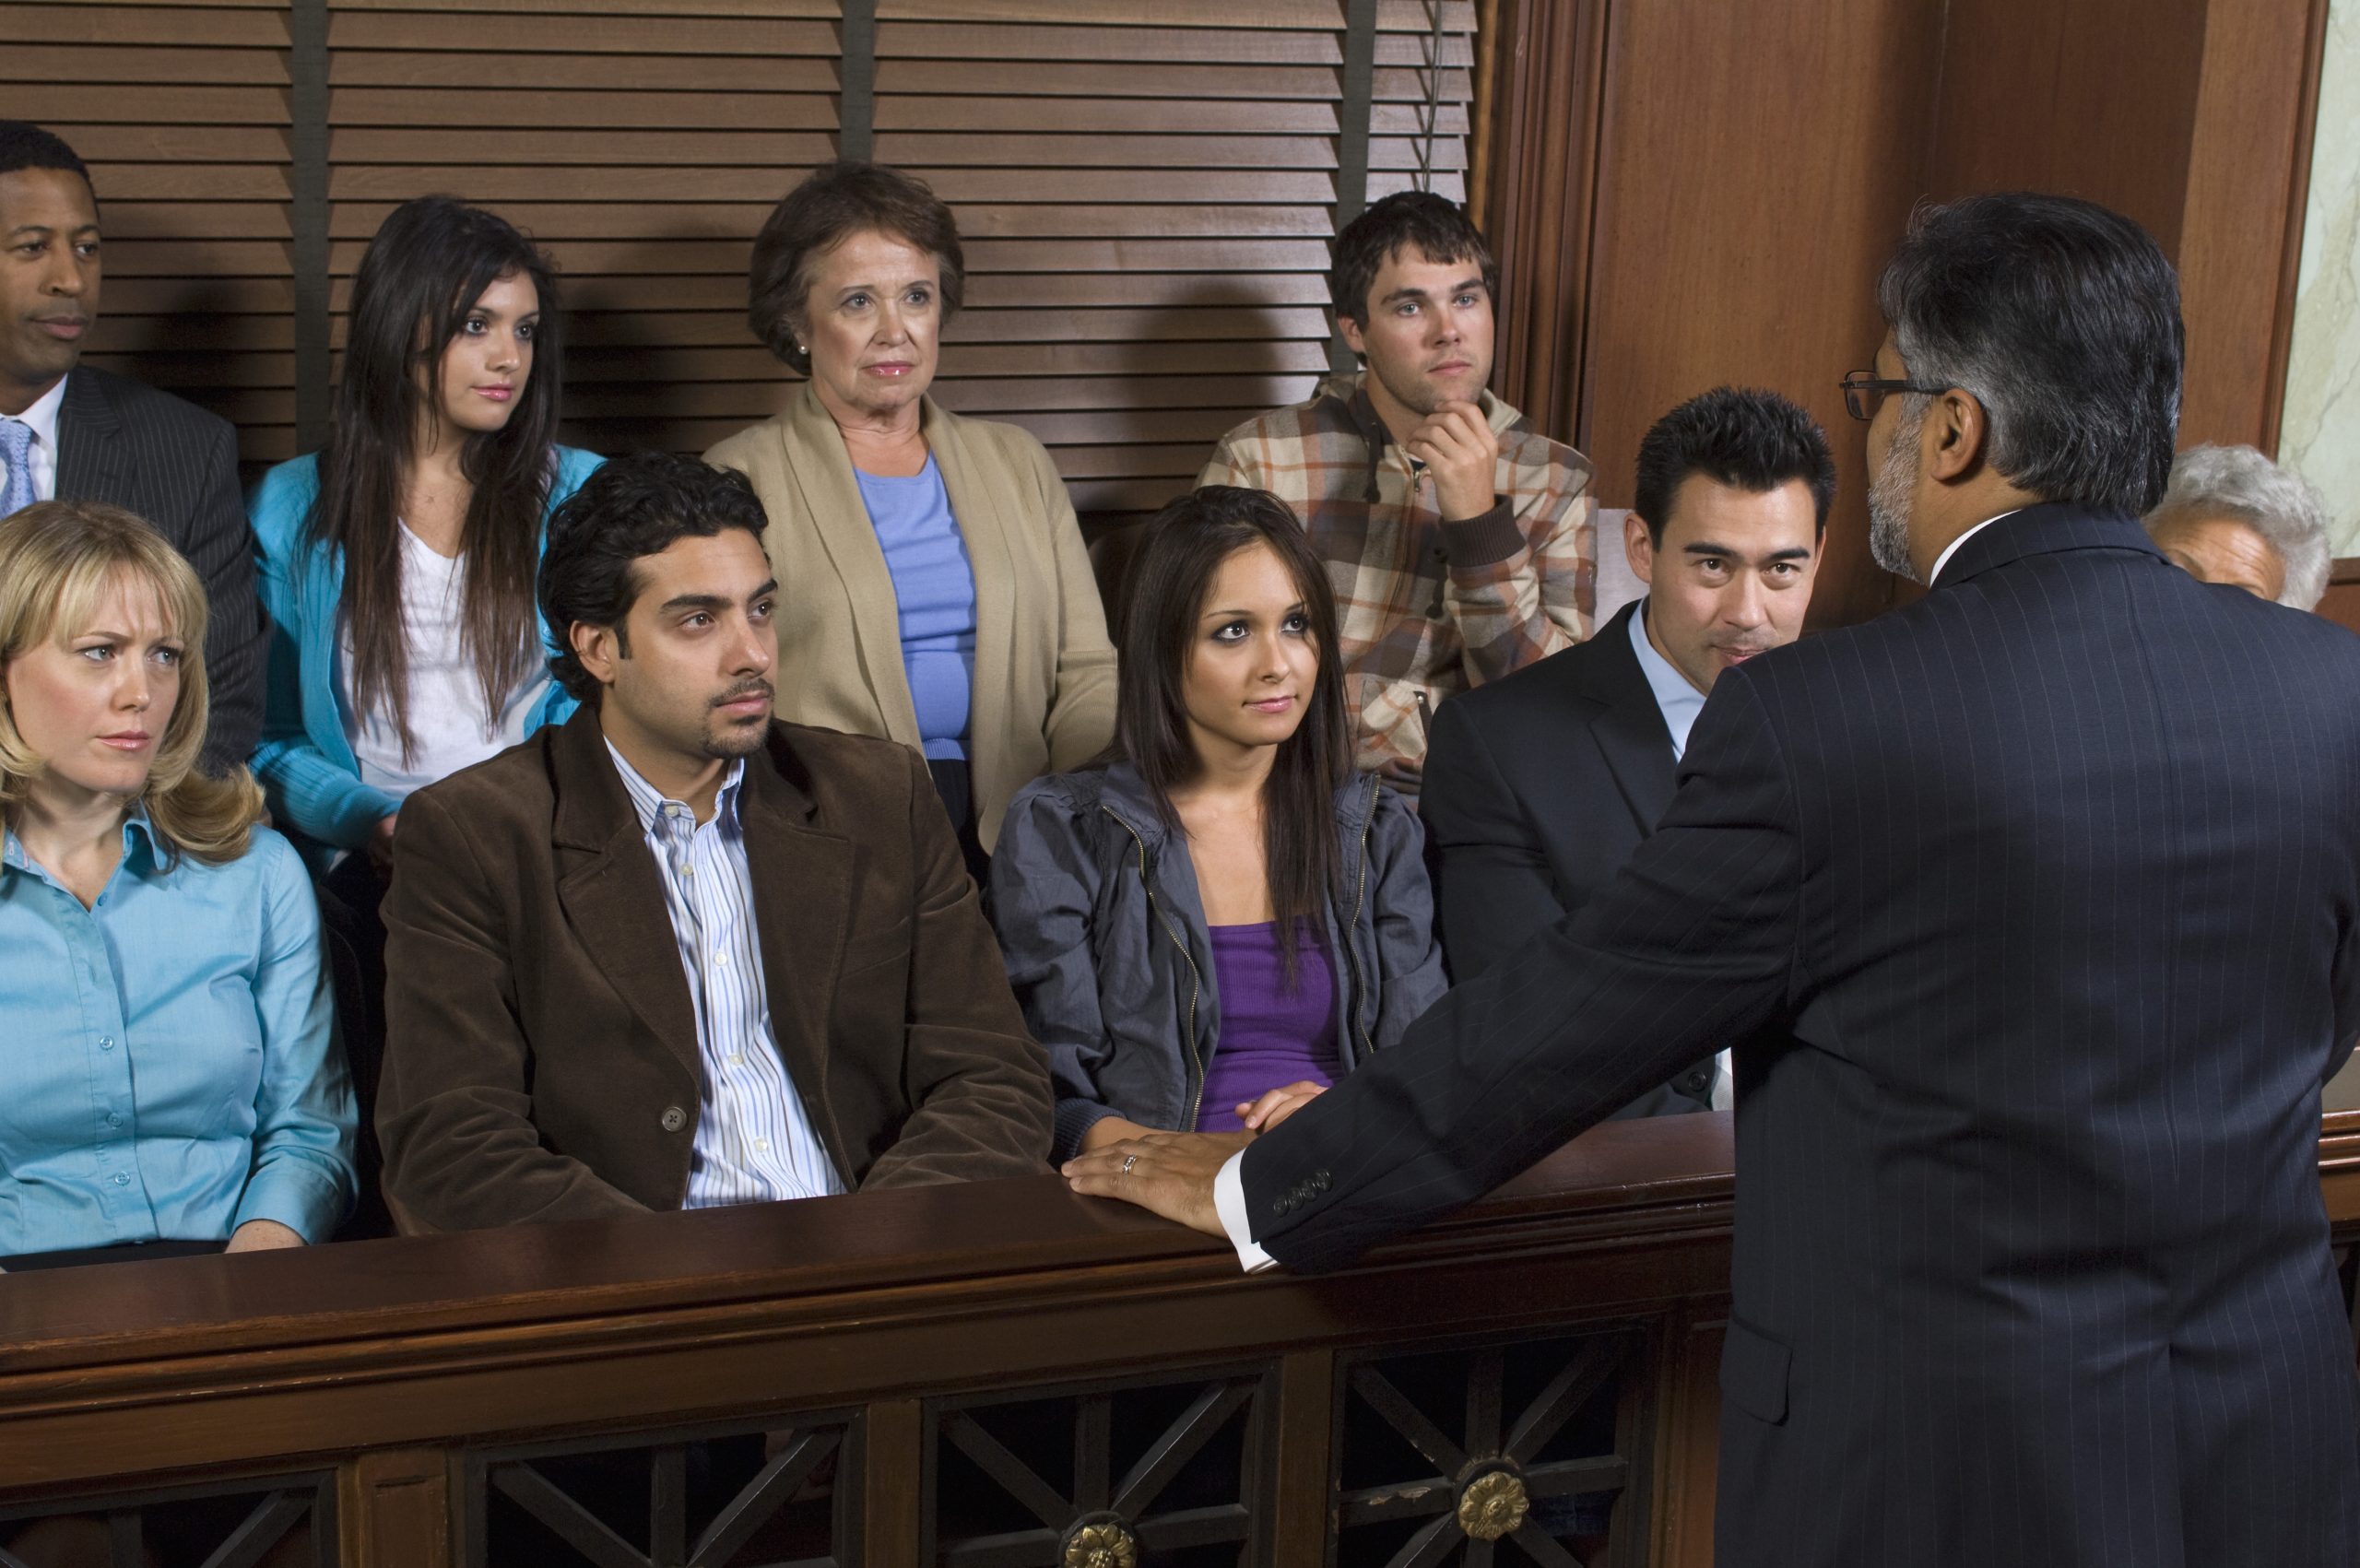 How Can You Tell a Relatable Story for a Jury?